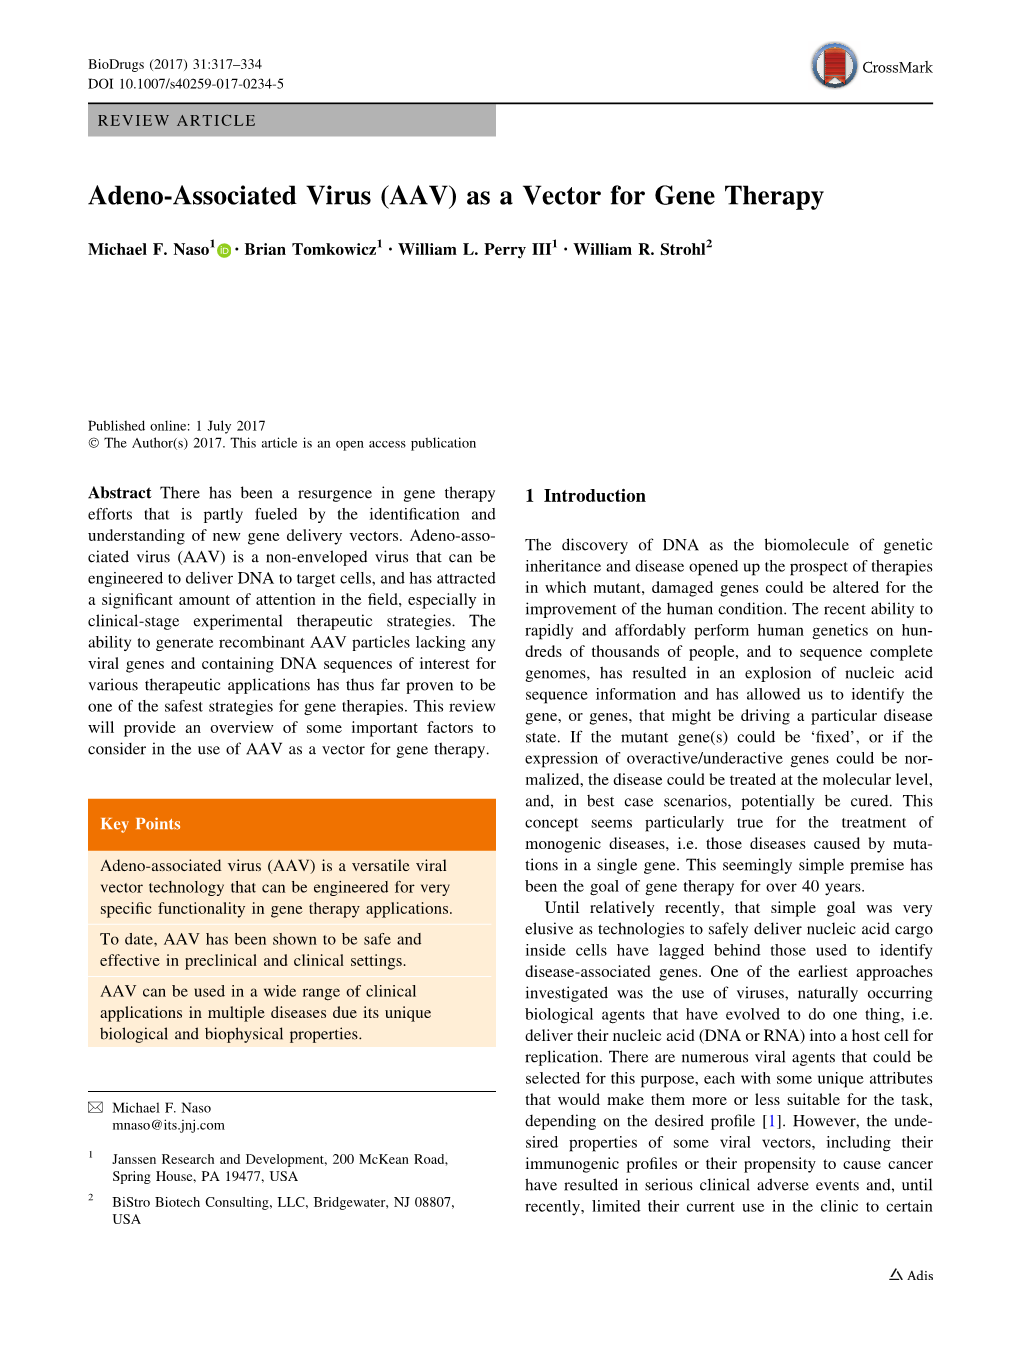 Adeno-Associated Virus (AAV) As a Vector for Gene Therapy